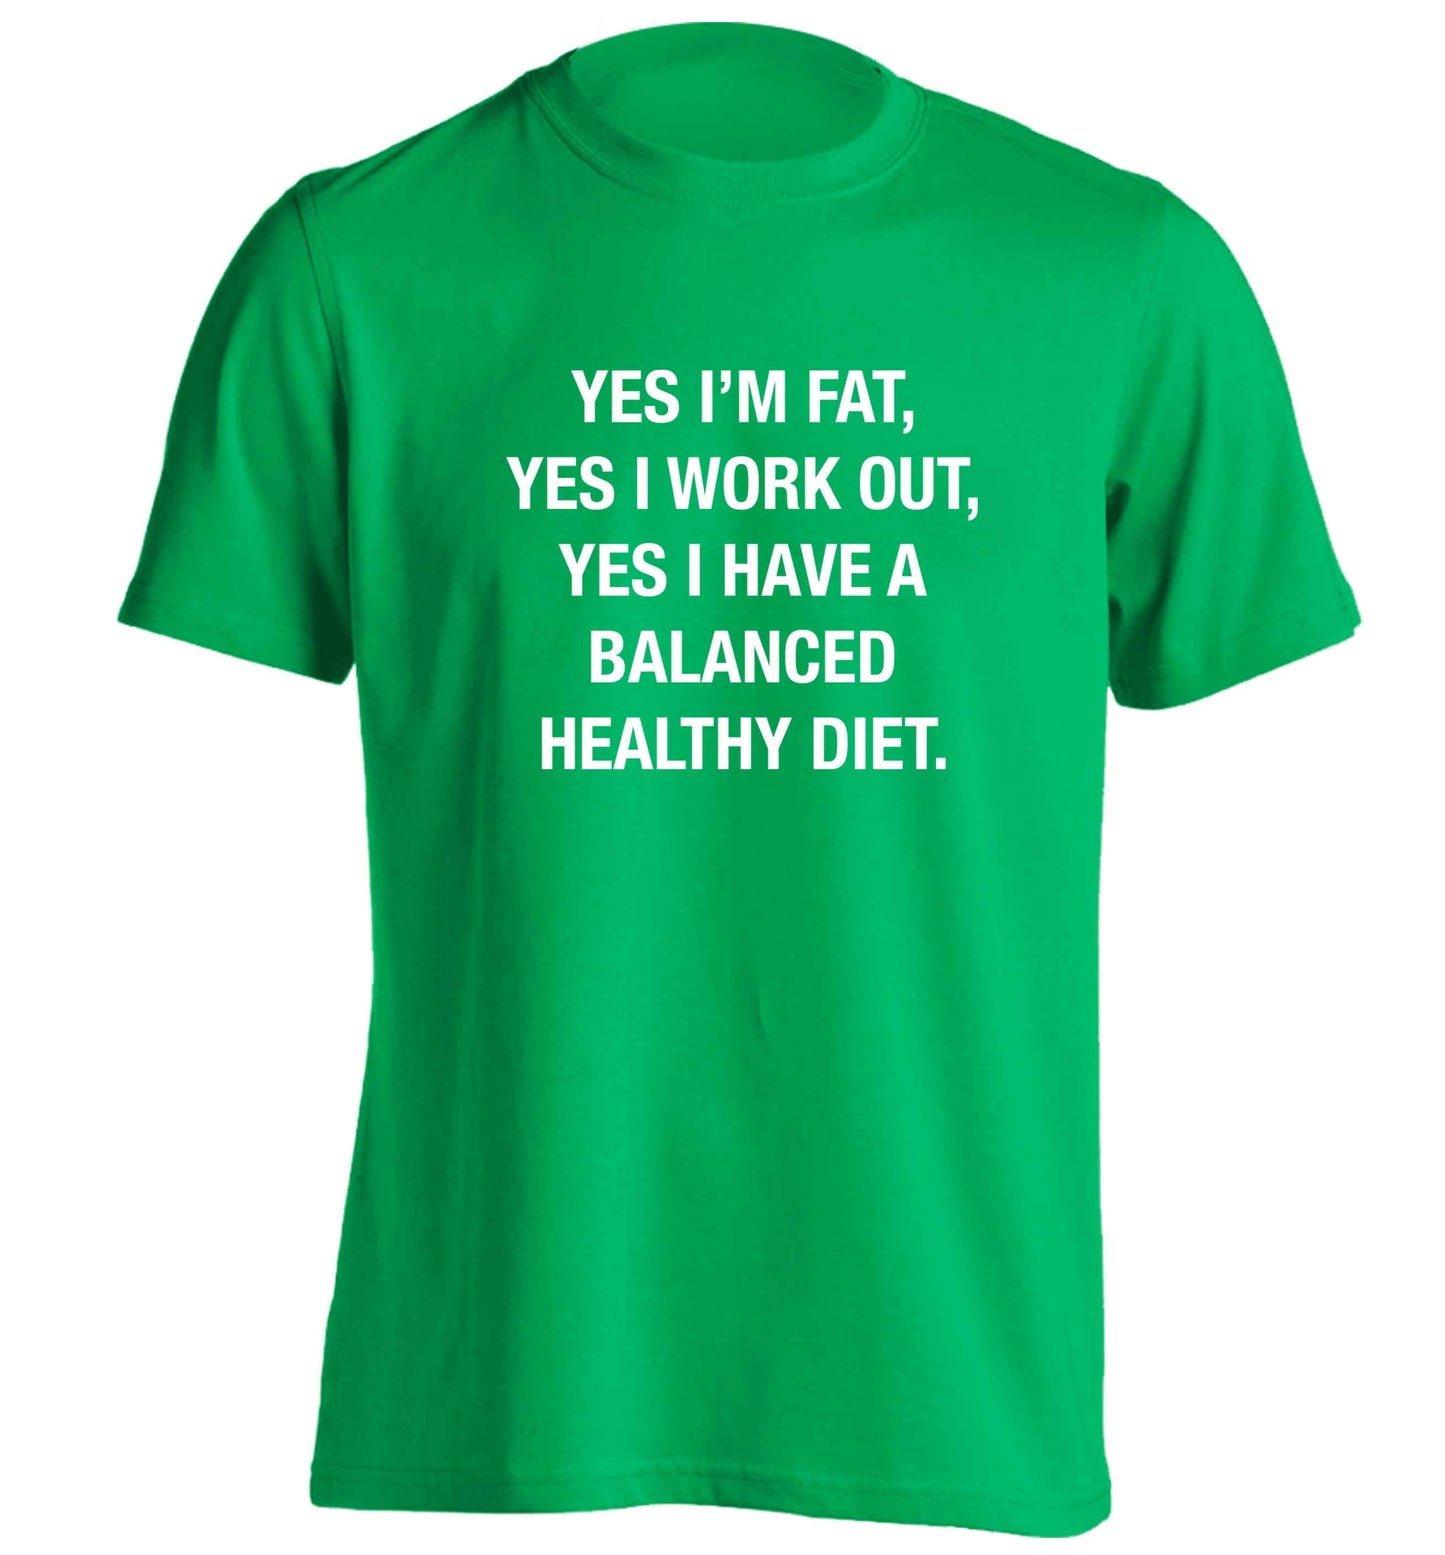 Yes I'm fat, yes I work out, yes I have a balanced healthy diet adults unisex green Tshirt 2XL